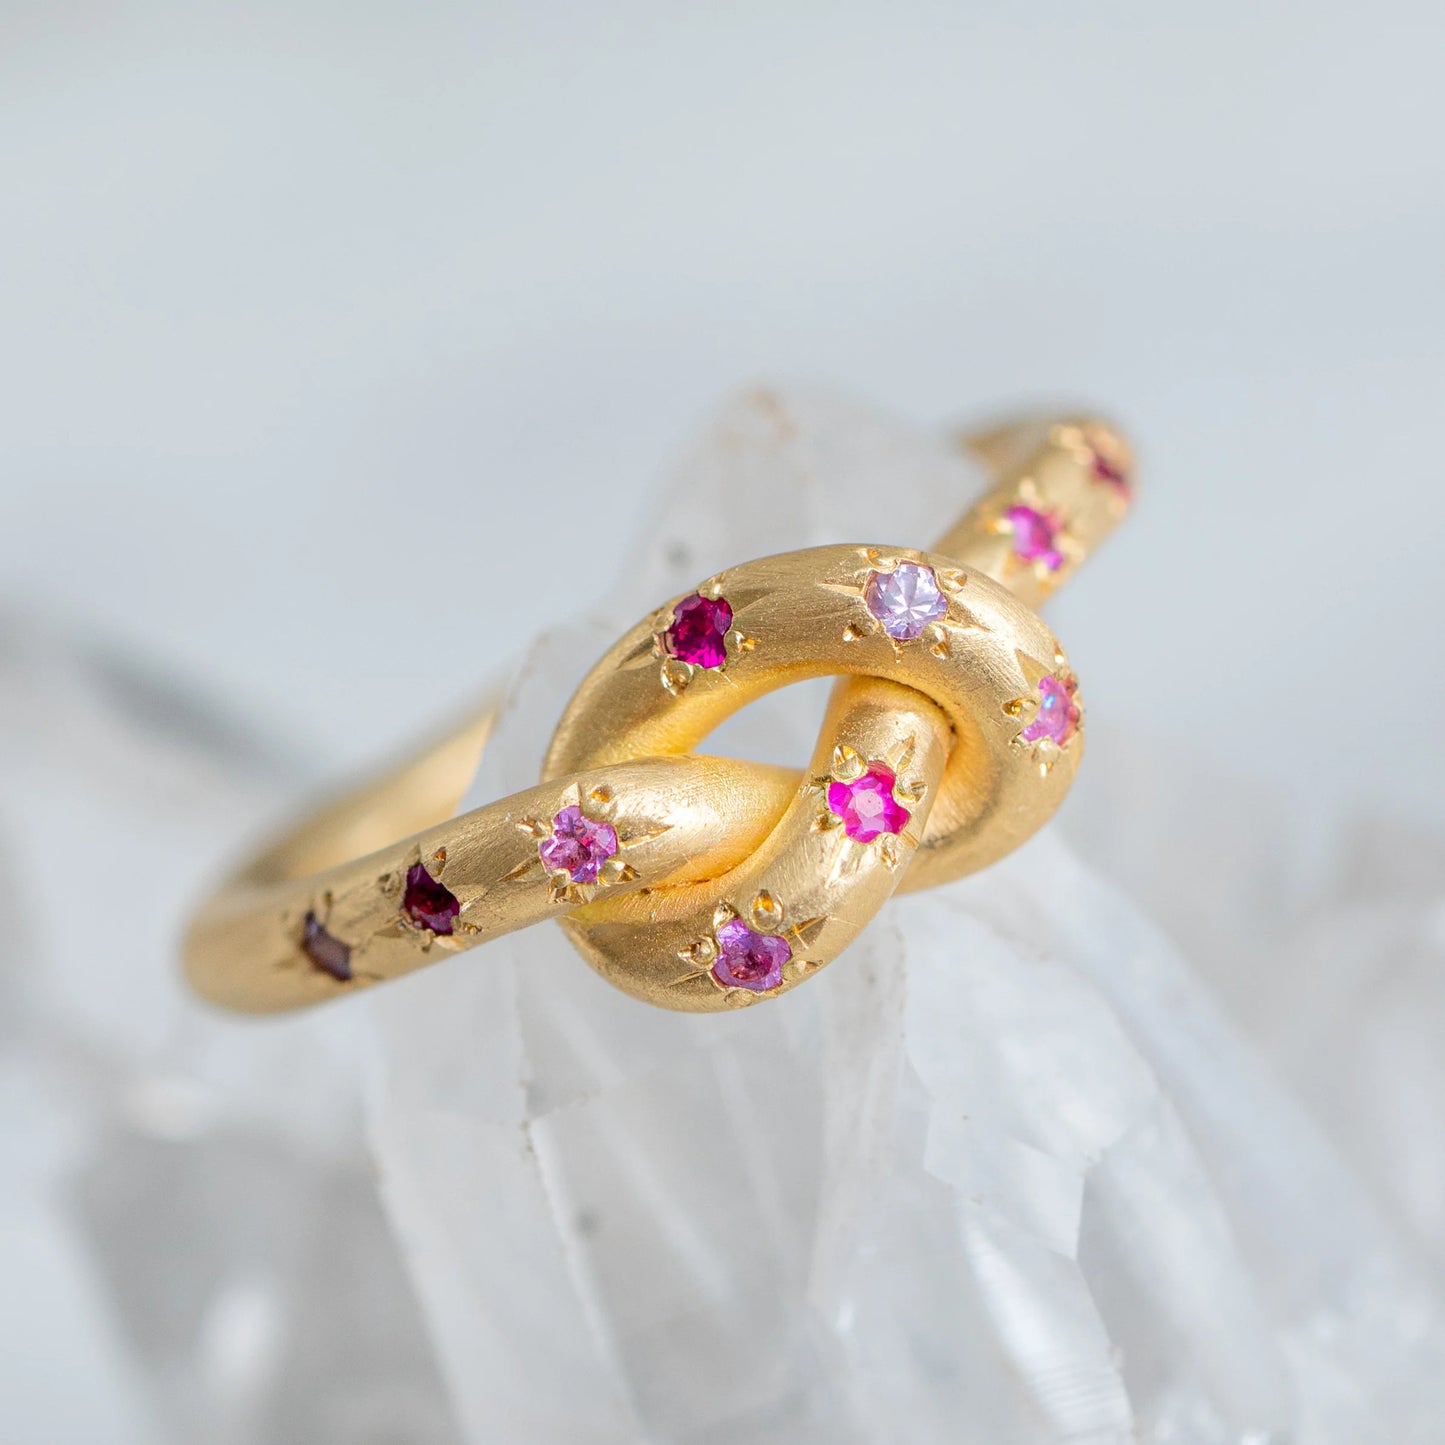 Shades Of Pink Pretzel Ring in 18ct Yellow Gold, Size N and a half (In Stock)